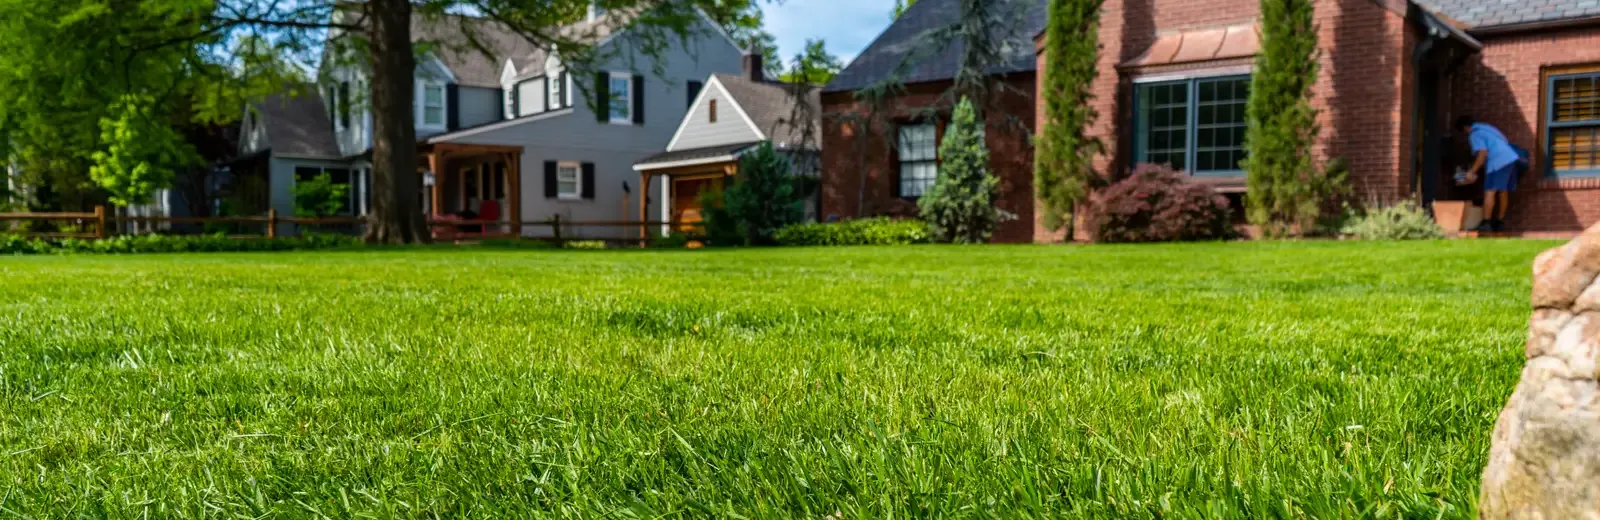 healthy green lawn in front of brick home